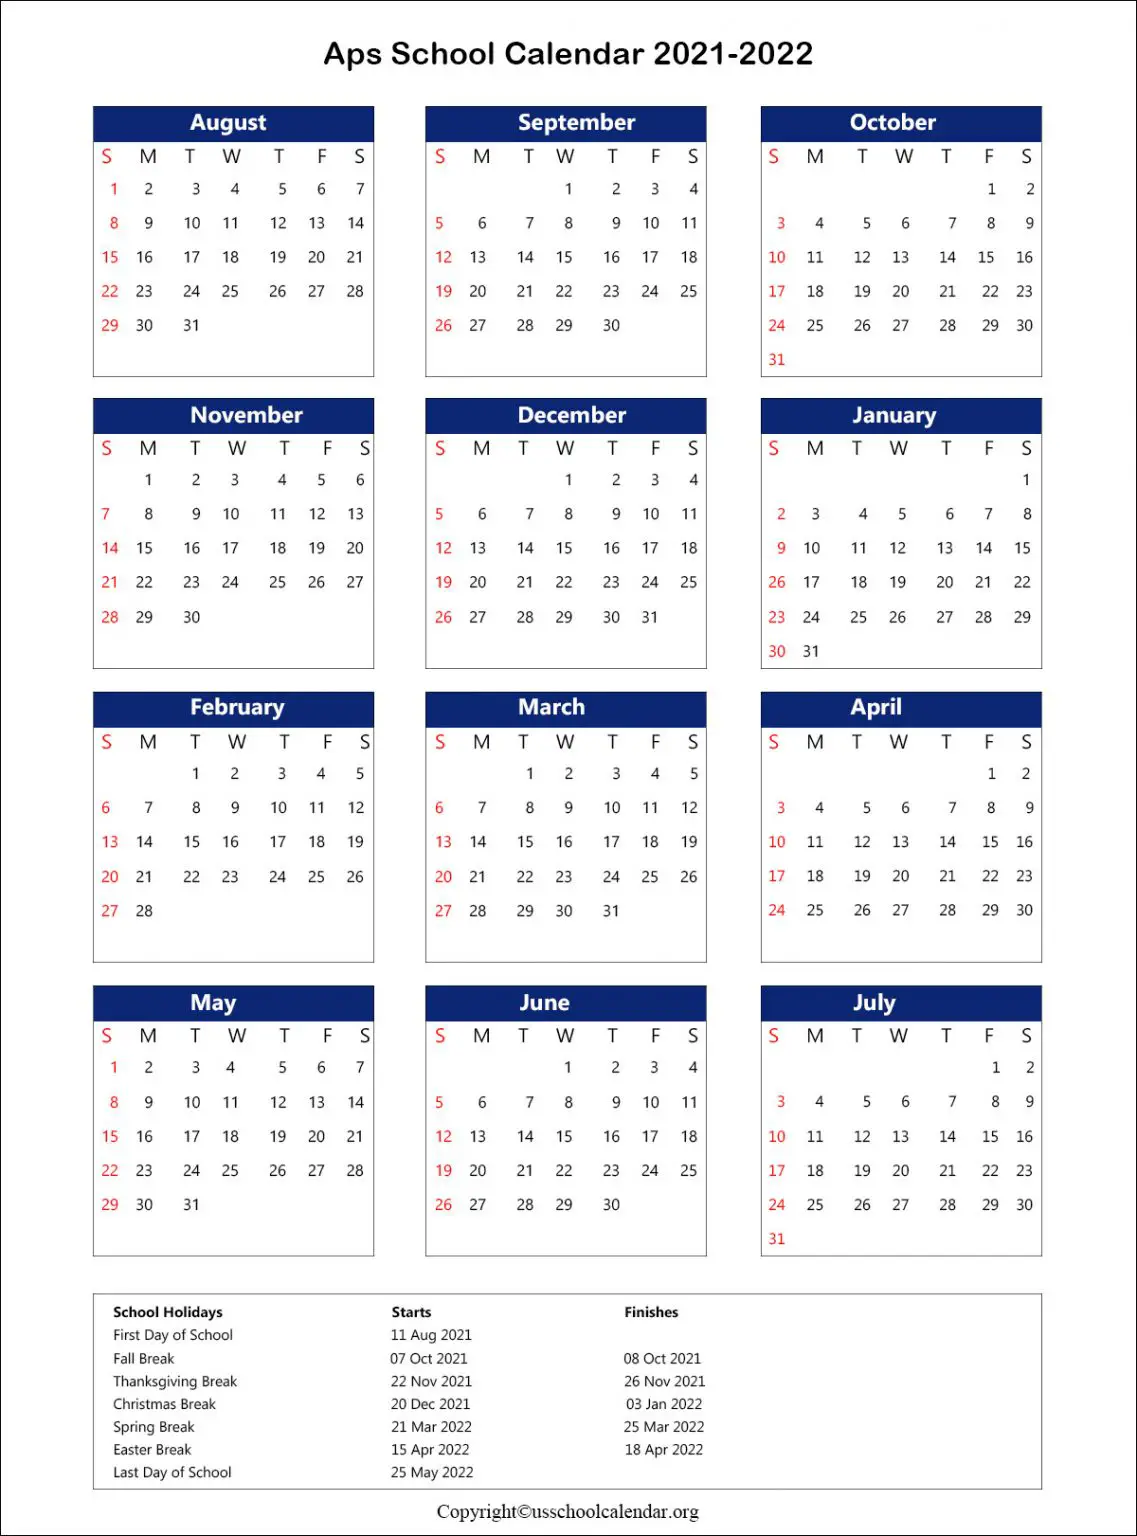 APS School Calendar with Holidays for 20212022